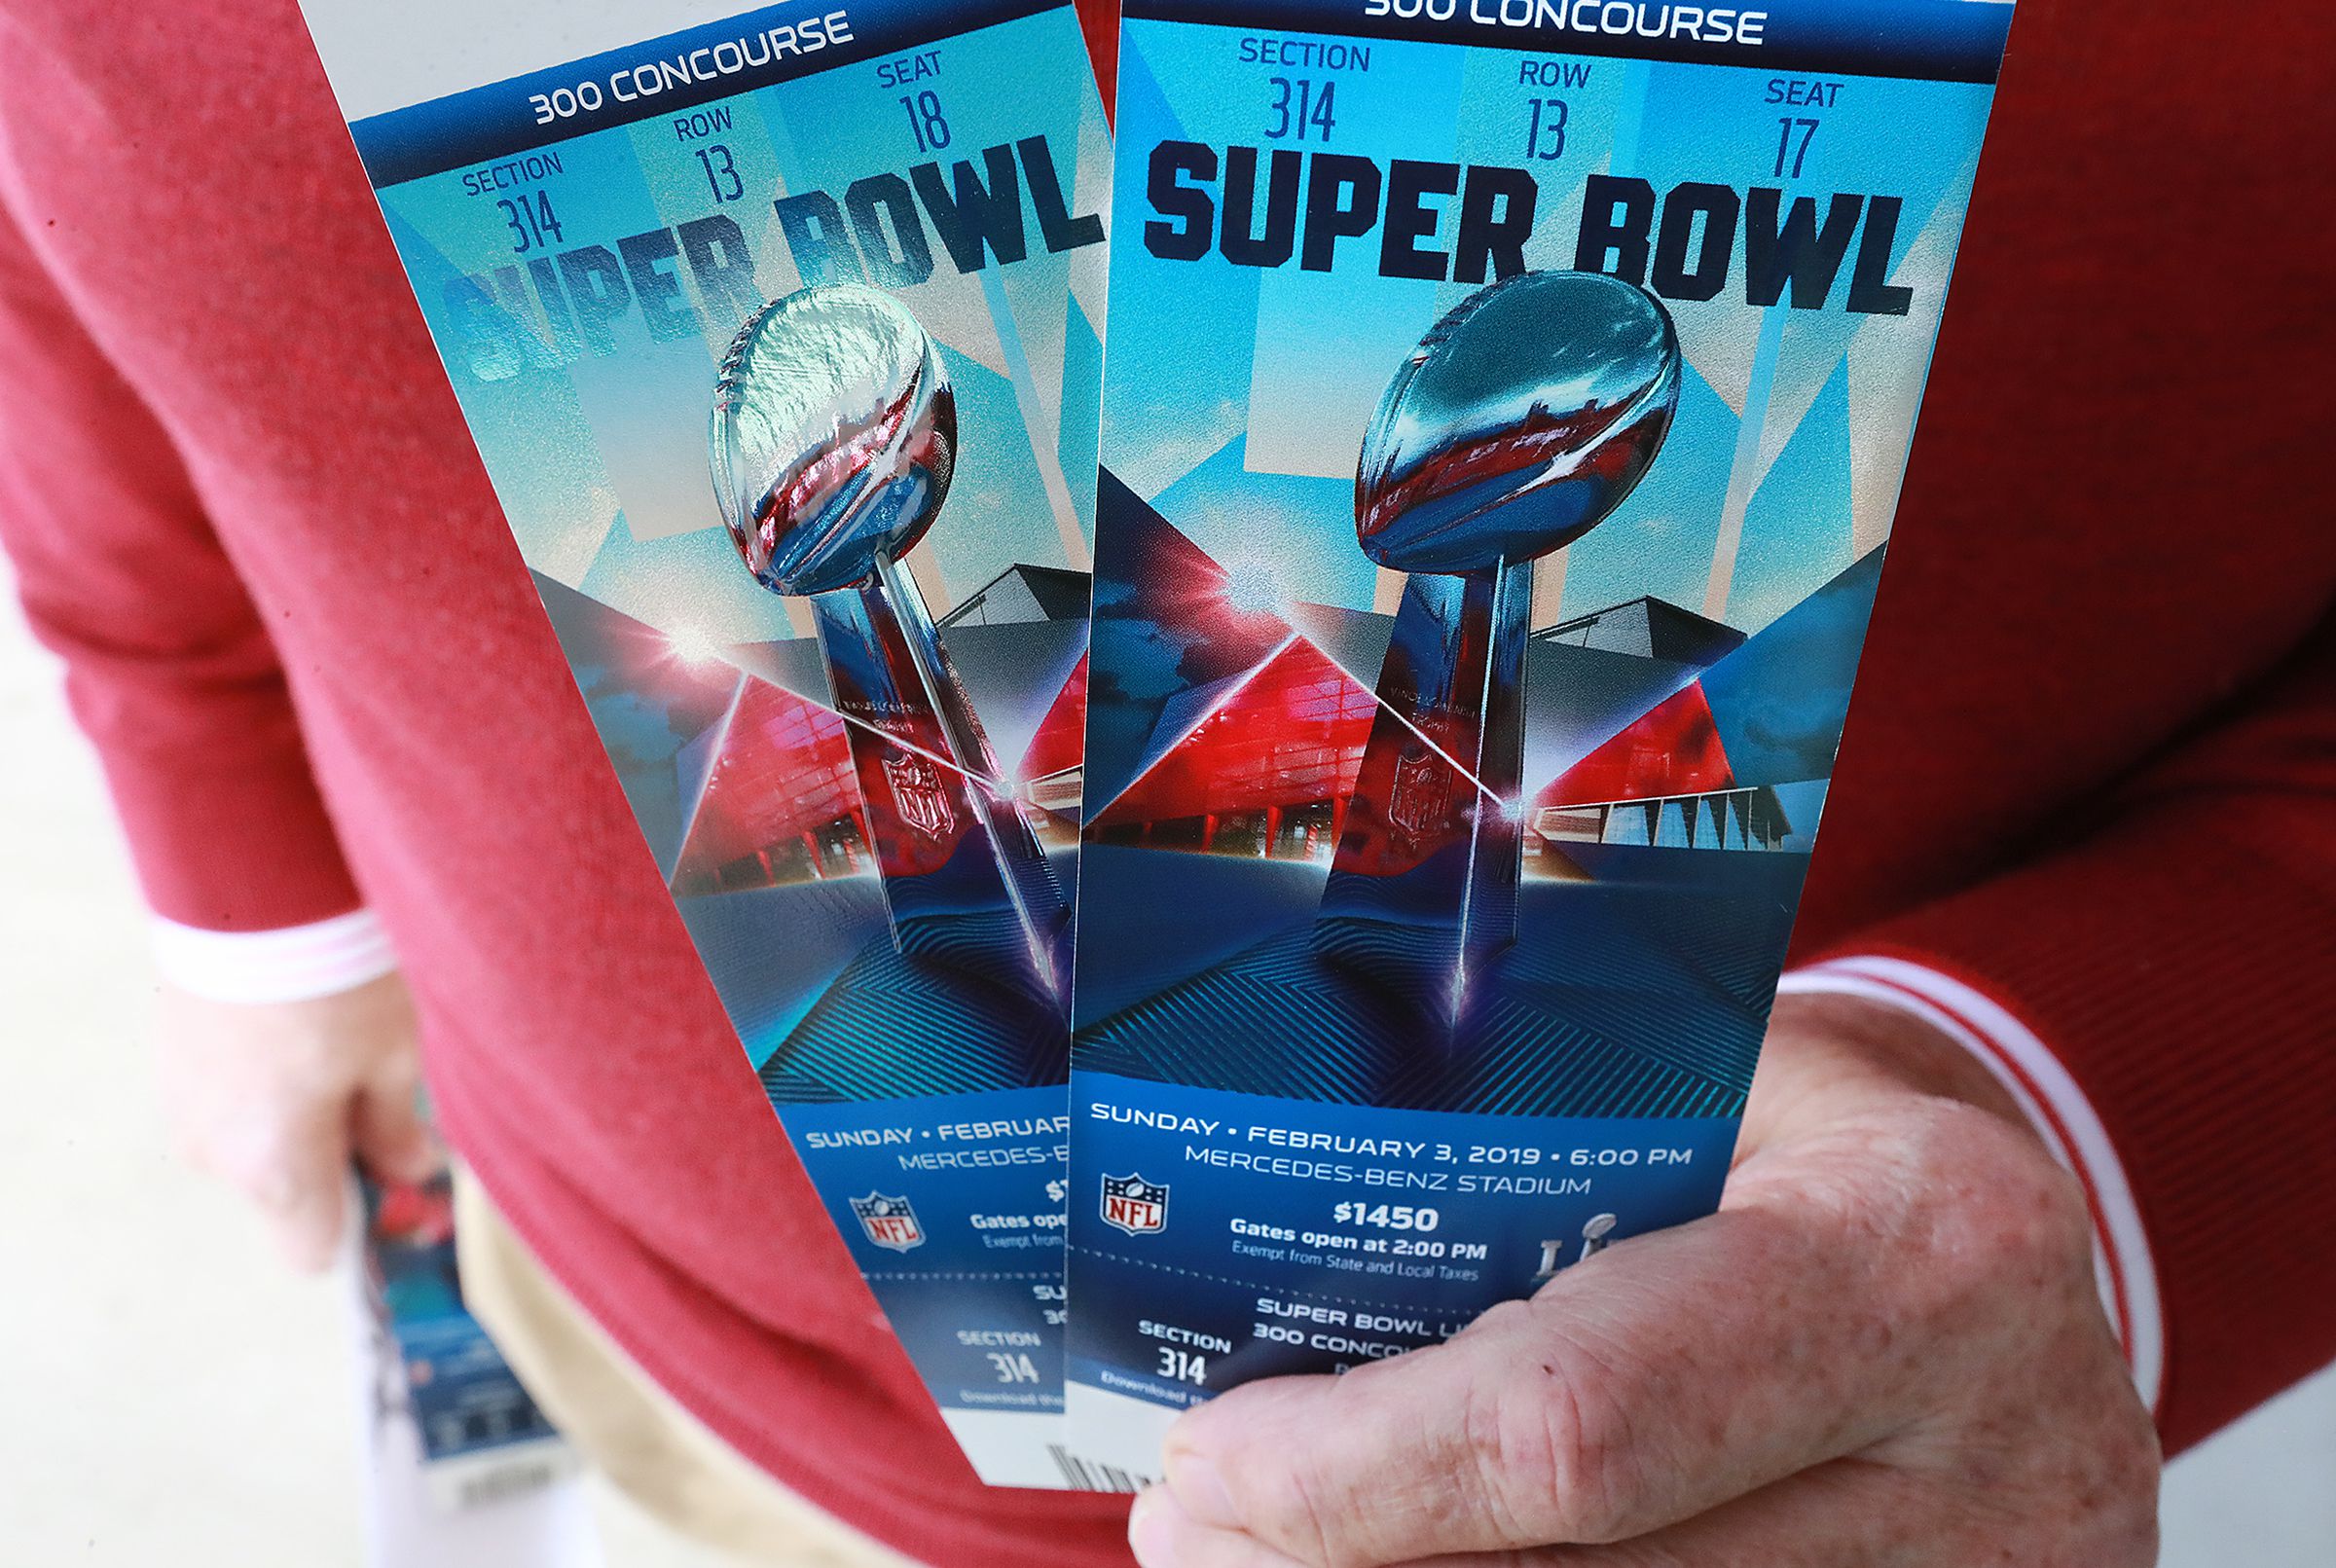 How to Get Super Bowl Tickets